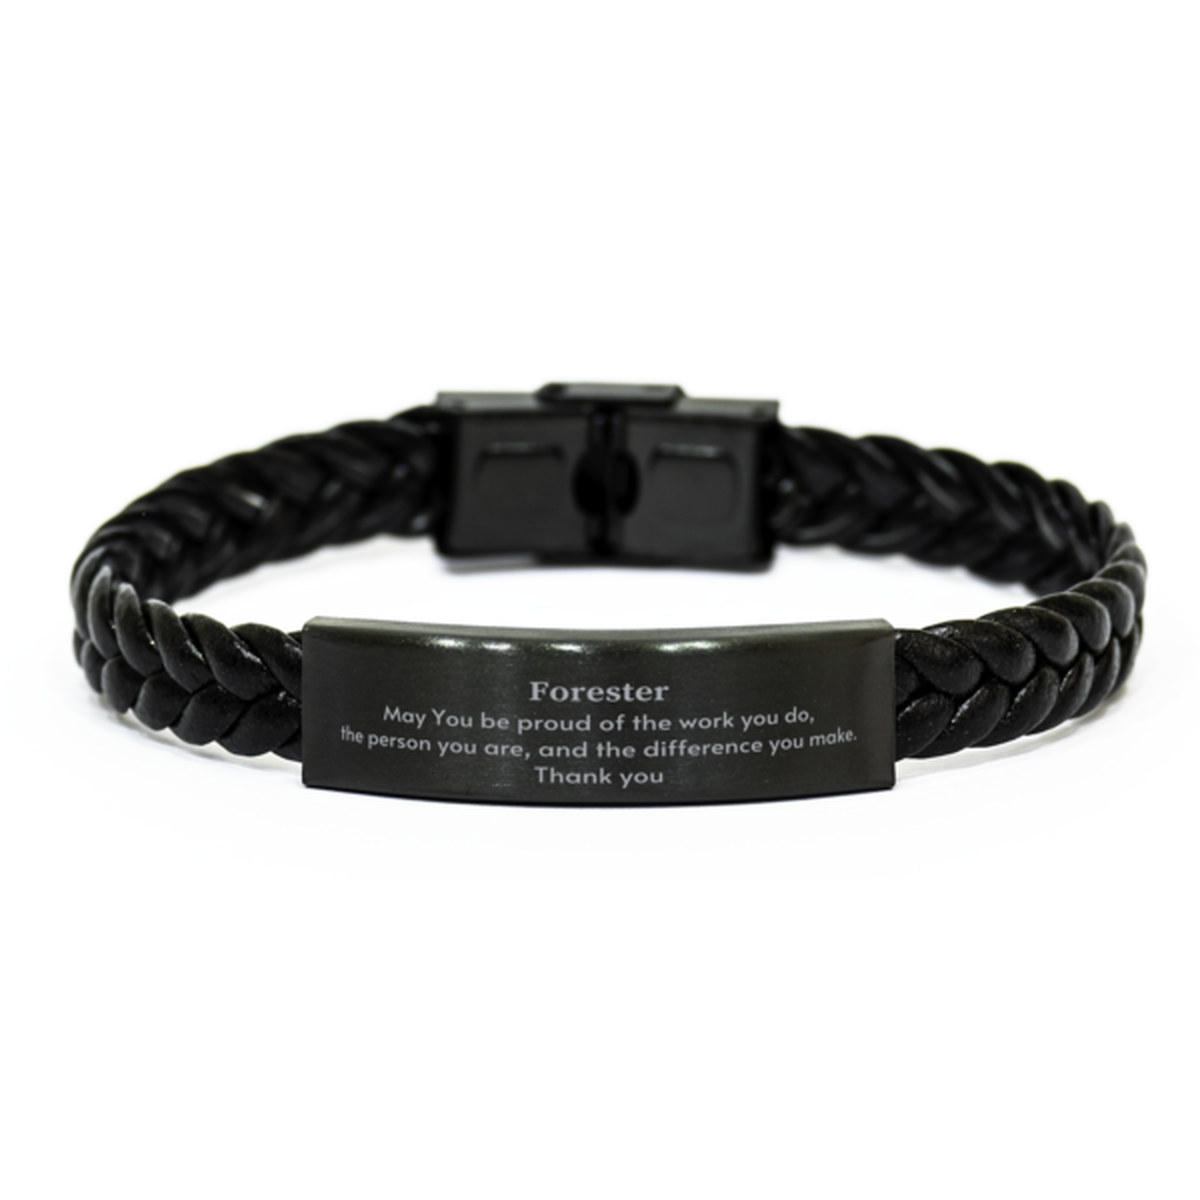 Heartwarming Braided Leather Bracelet Retirement Coworkers Gifts for Forester, Forester May You be proud of the work you do, the person you are Gifts for Boss Men Women Friends